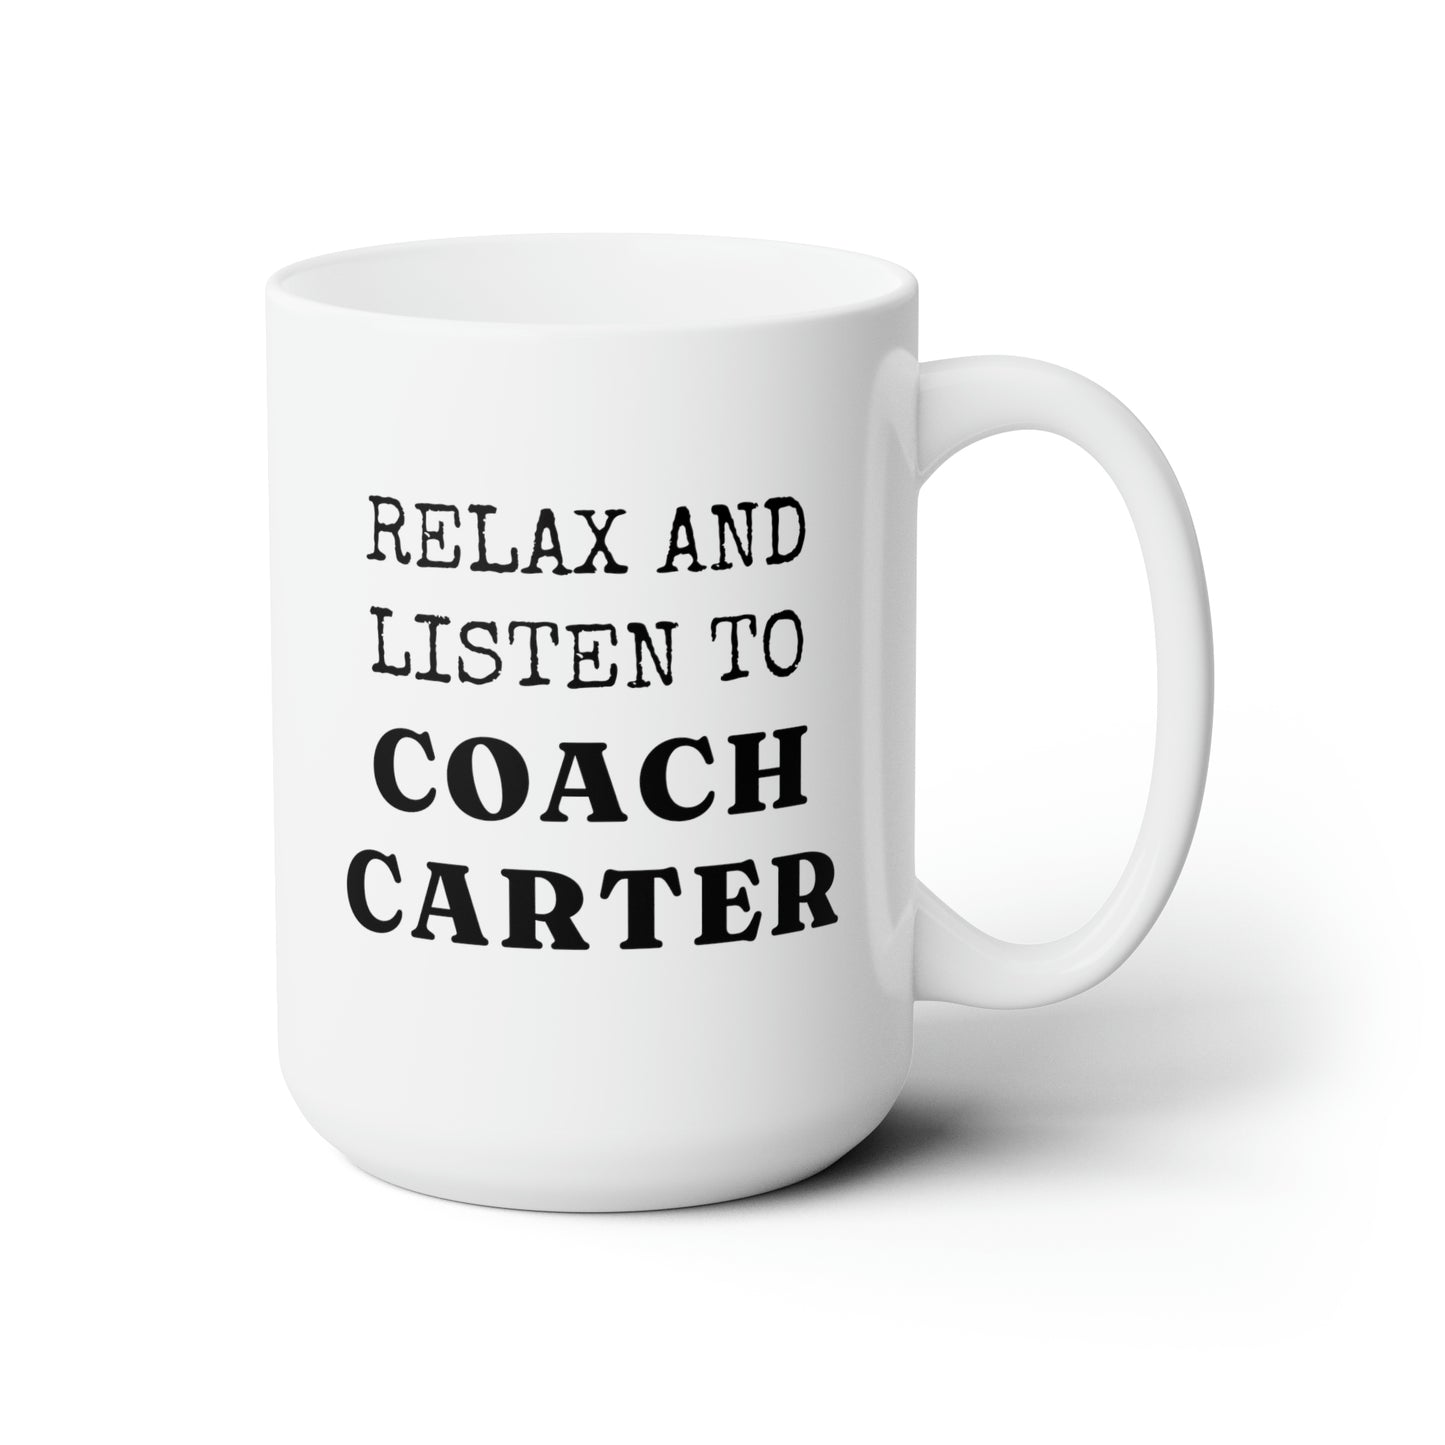 Relax And Listen To Coach 15oz white funny large coffee mug gift for coaches thank you from players team custom personalized customize name waveywares wavey wares wavywares wavy wares